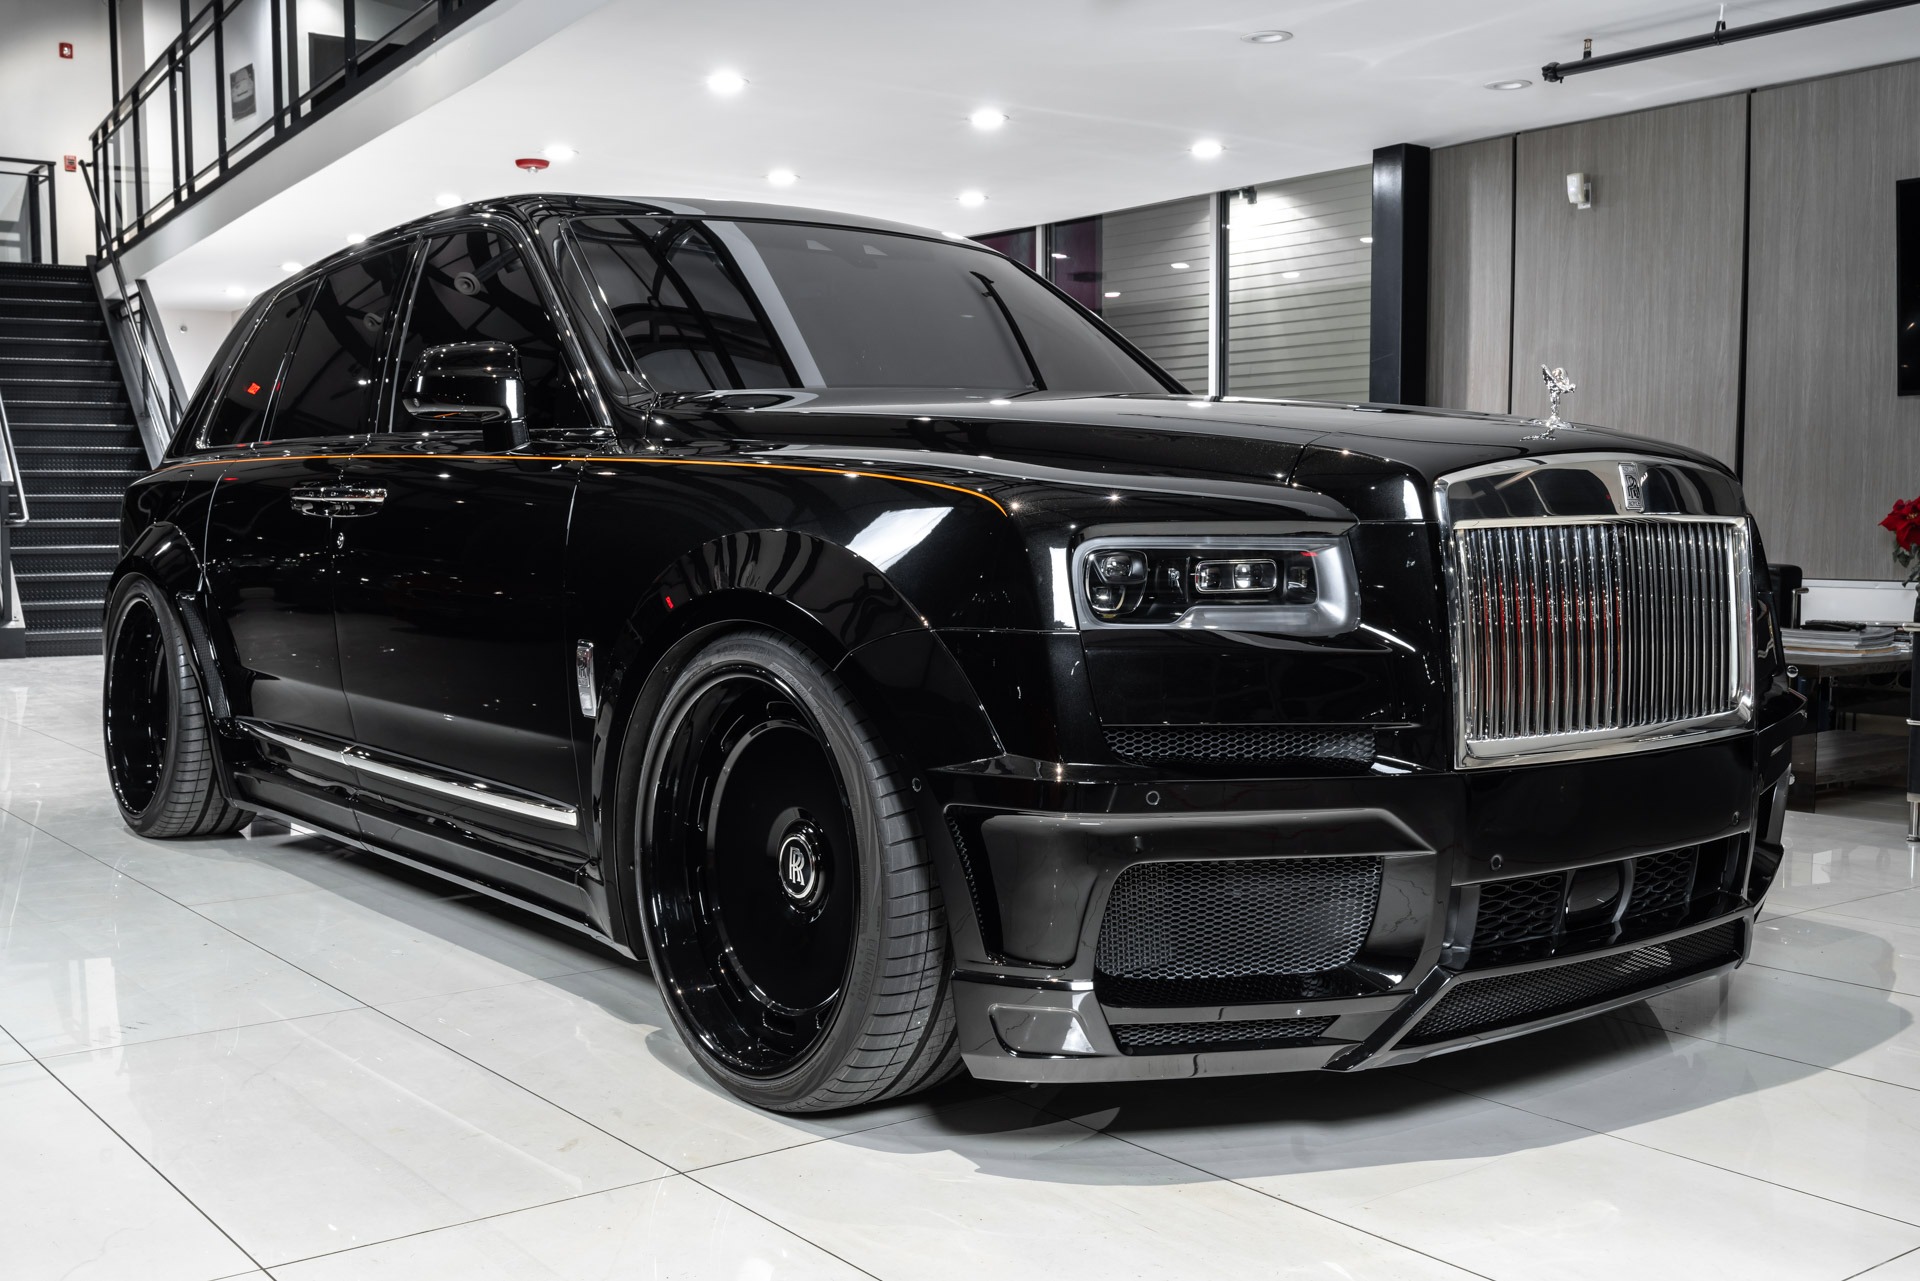 Used 2022 Rolls-Royce Cullinan SUV The HOTTEST Example Available